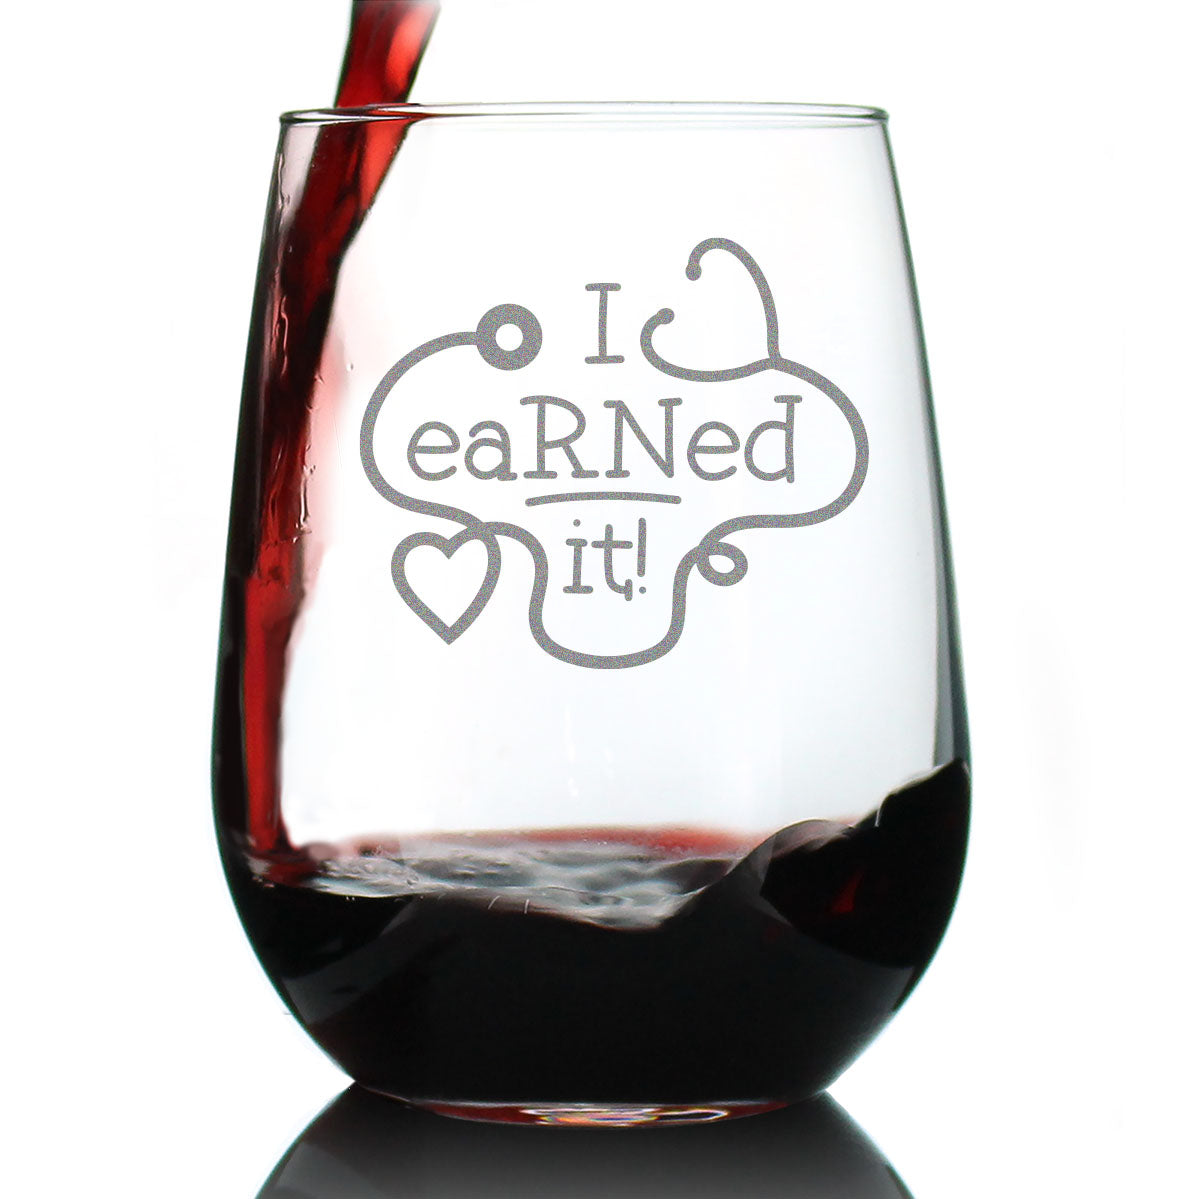 I eaRNed it – Cute Funny Registered Nurse Stemless Wine Glass - Healthcare Themed Gifts or Party Decor for Women and Men - Large 17 oz